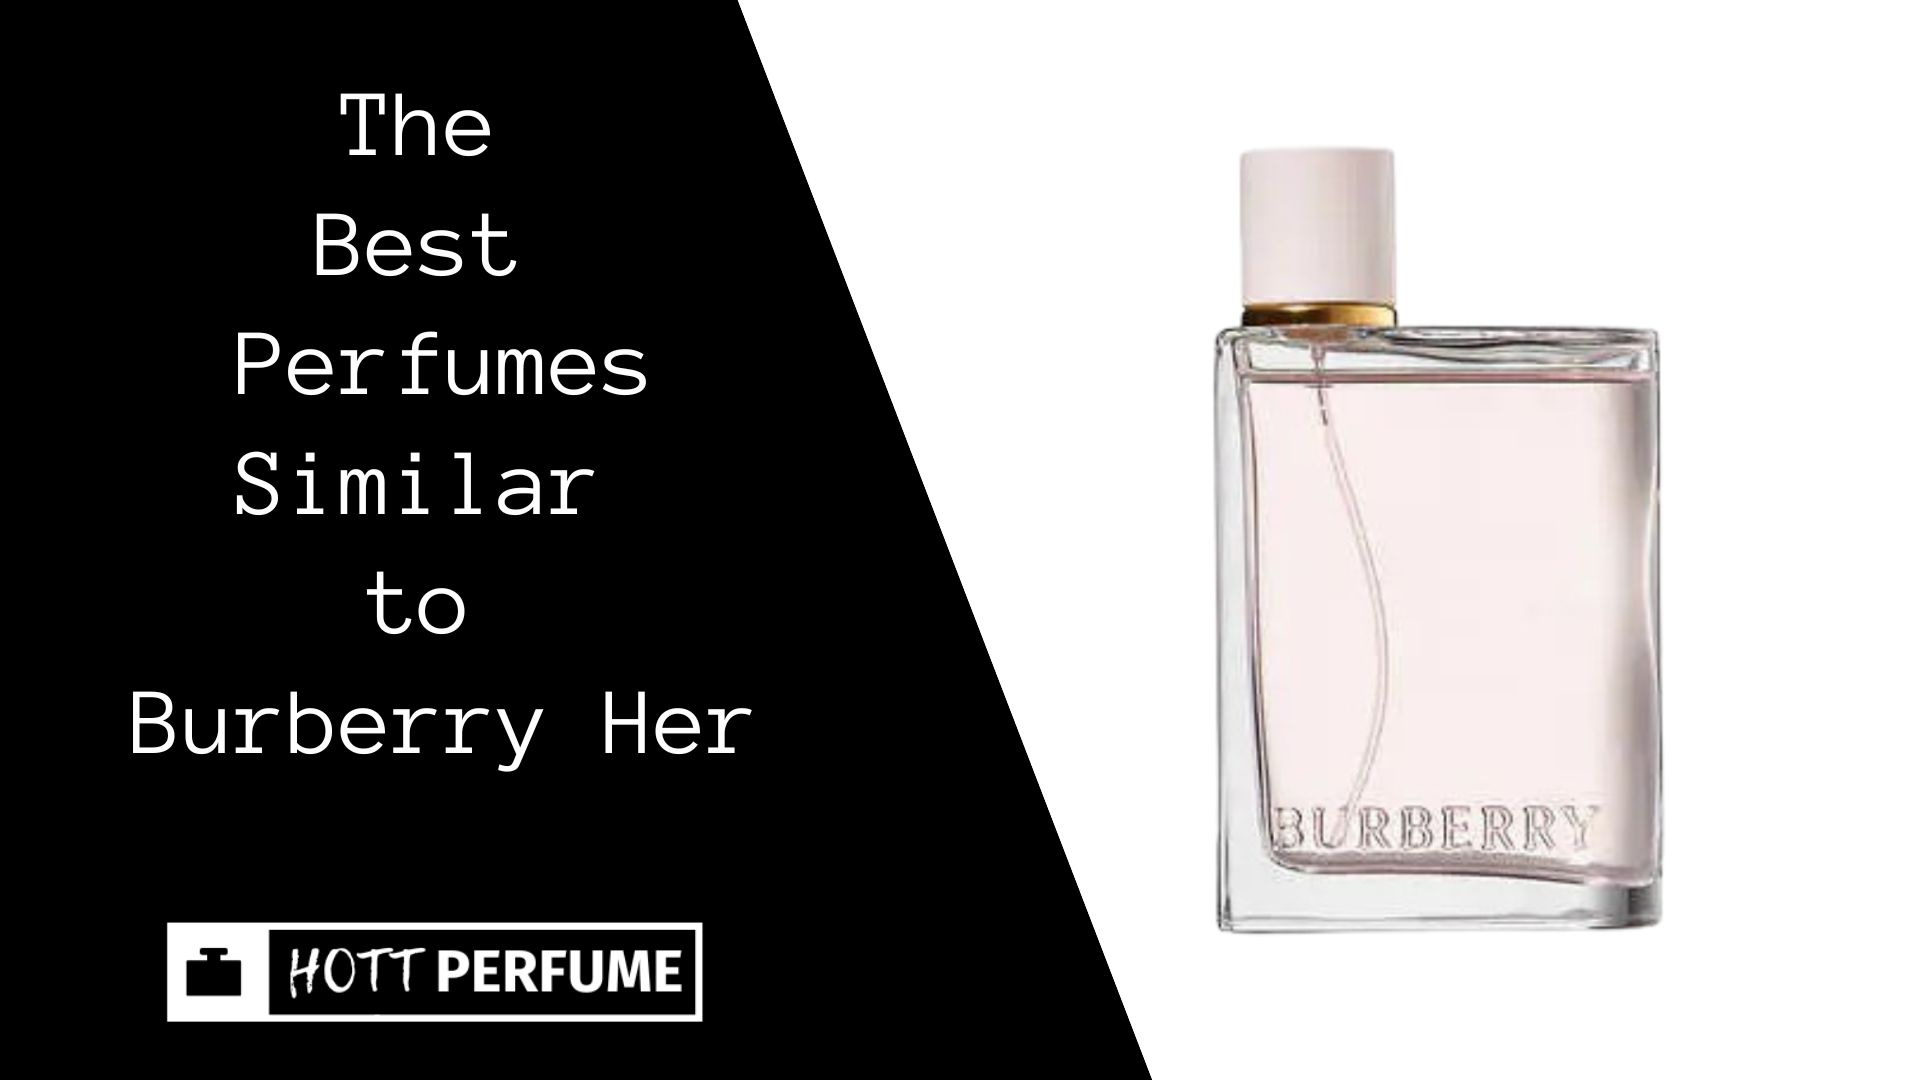 The Best Perfumes Similar to Burberry Her